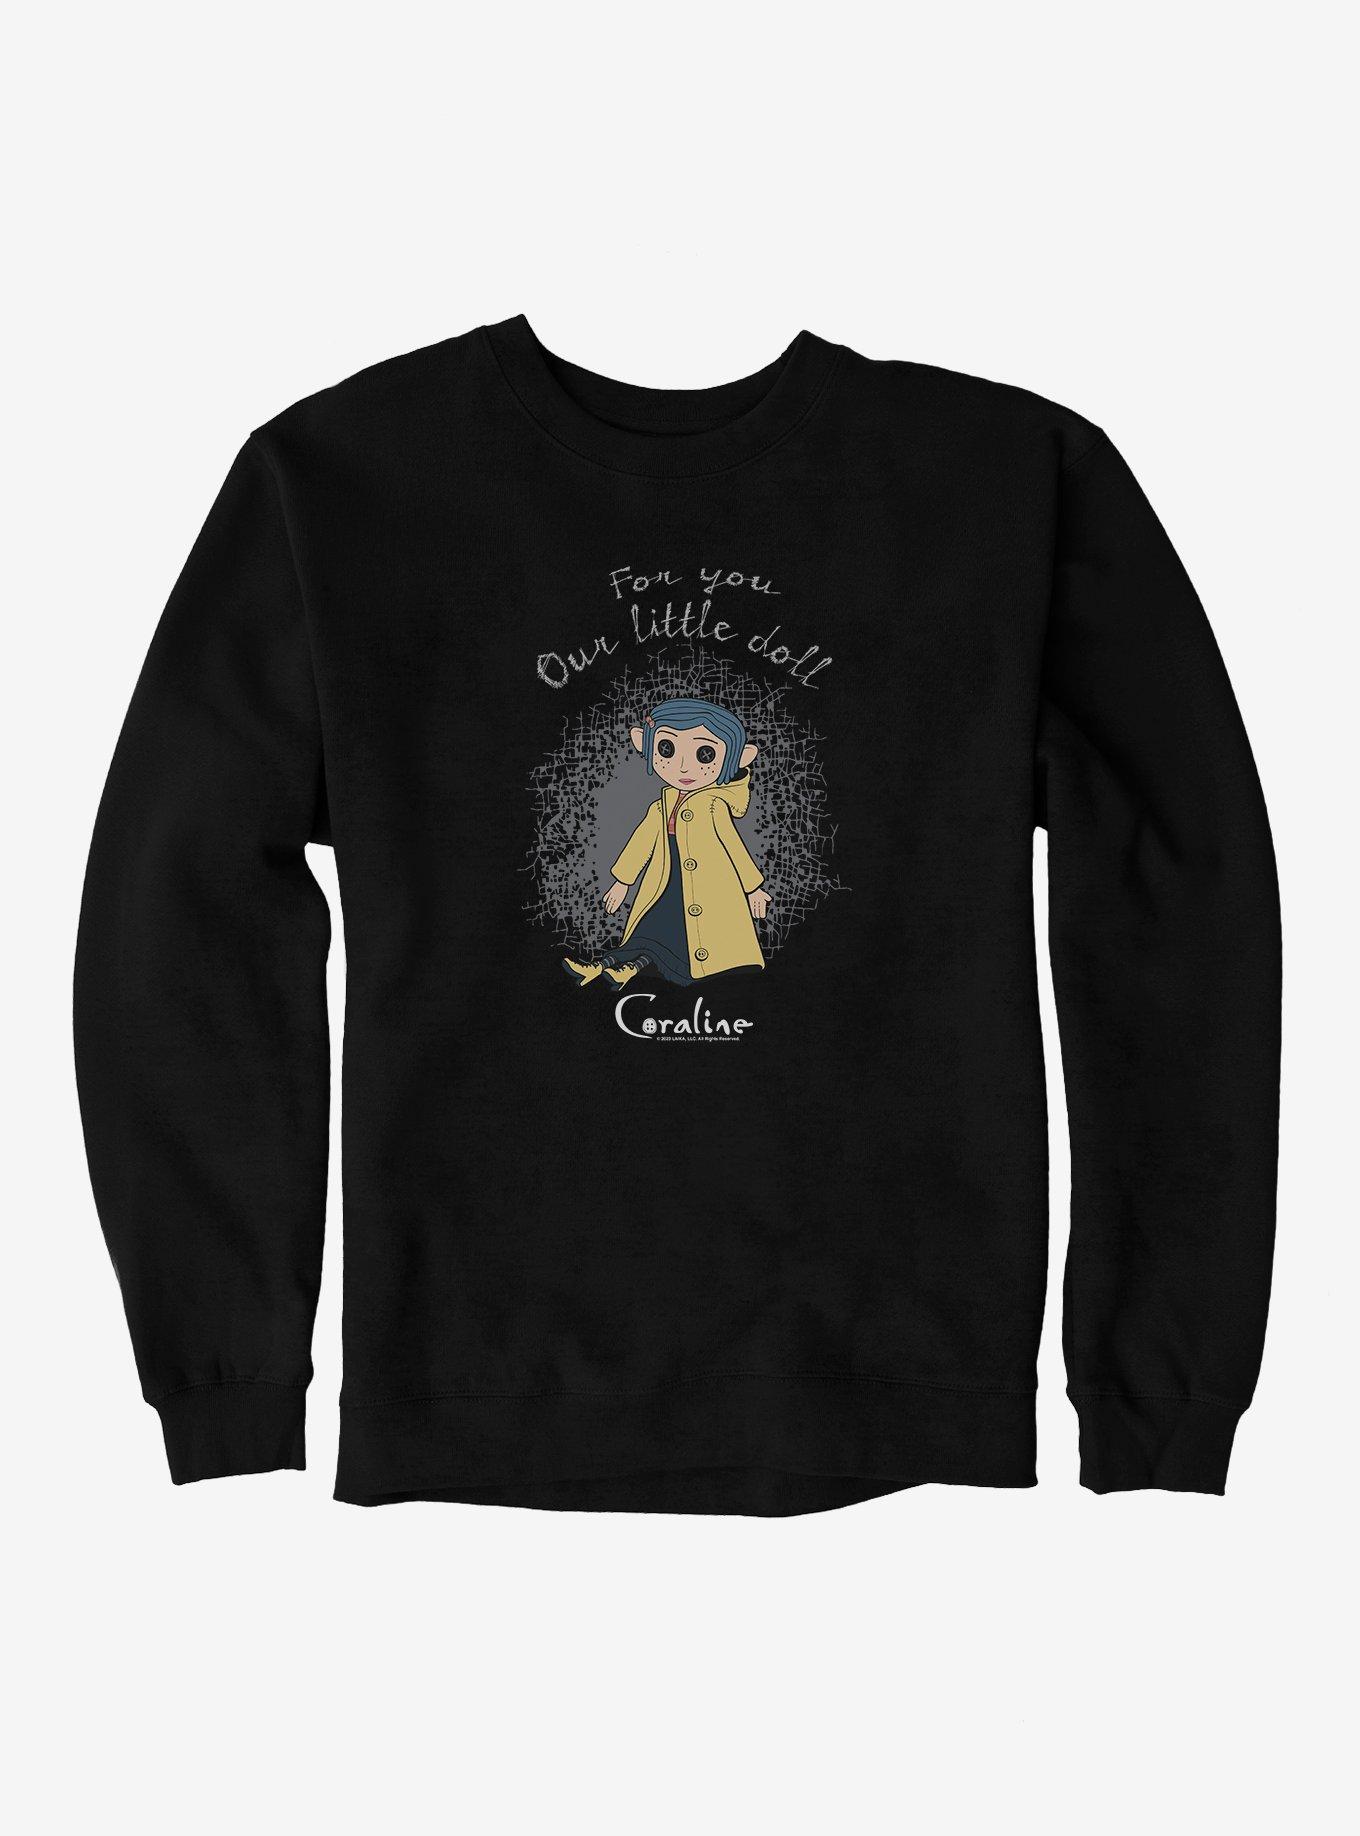 Coraline For You Our Little Doll Sweatshirt, BLACK, hi-res